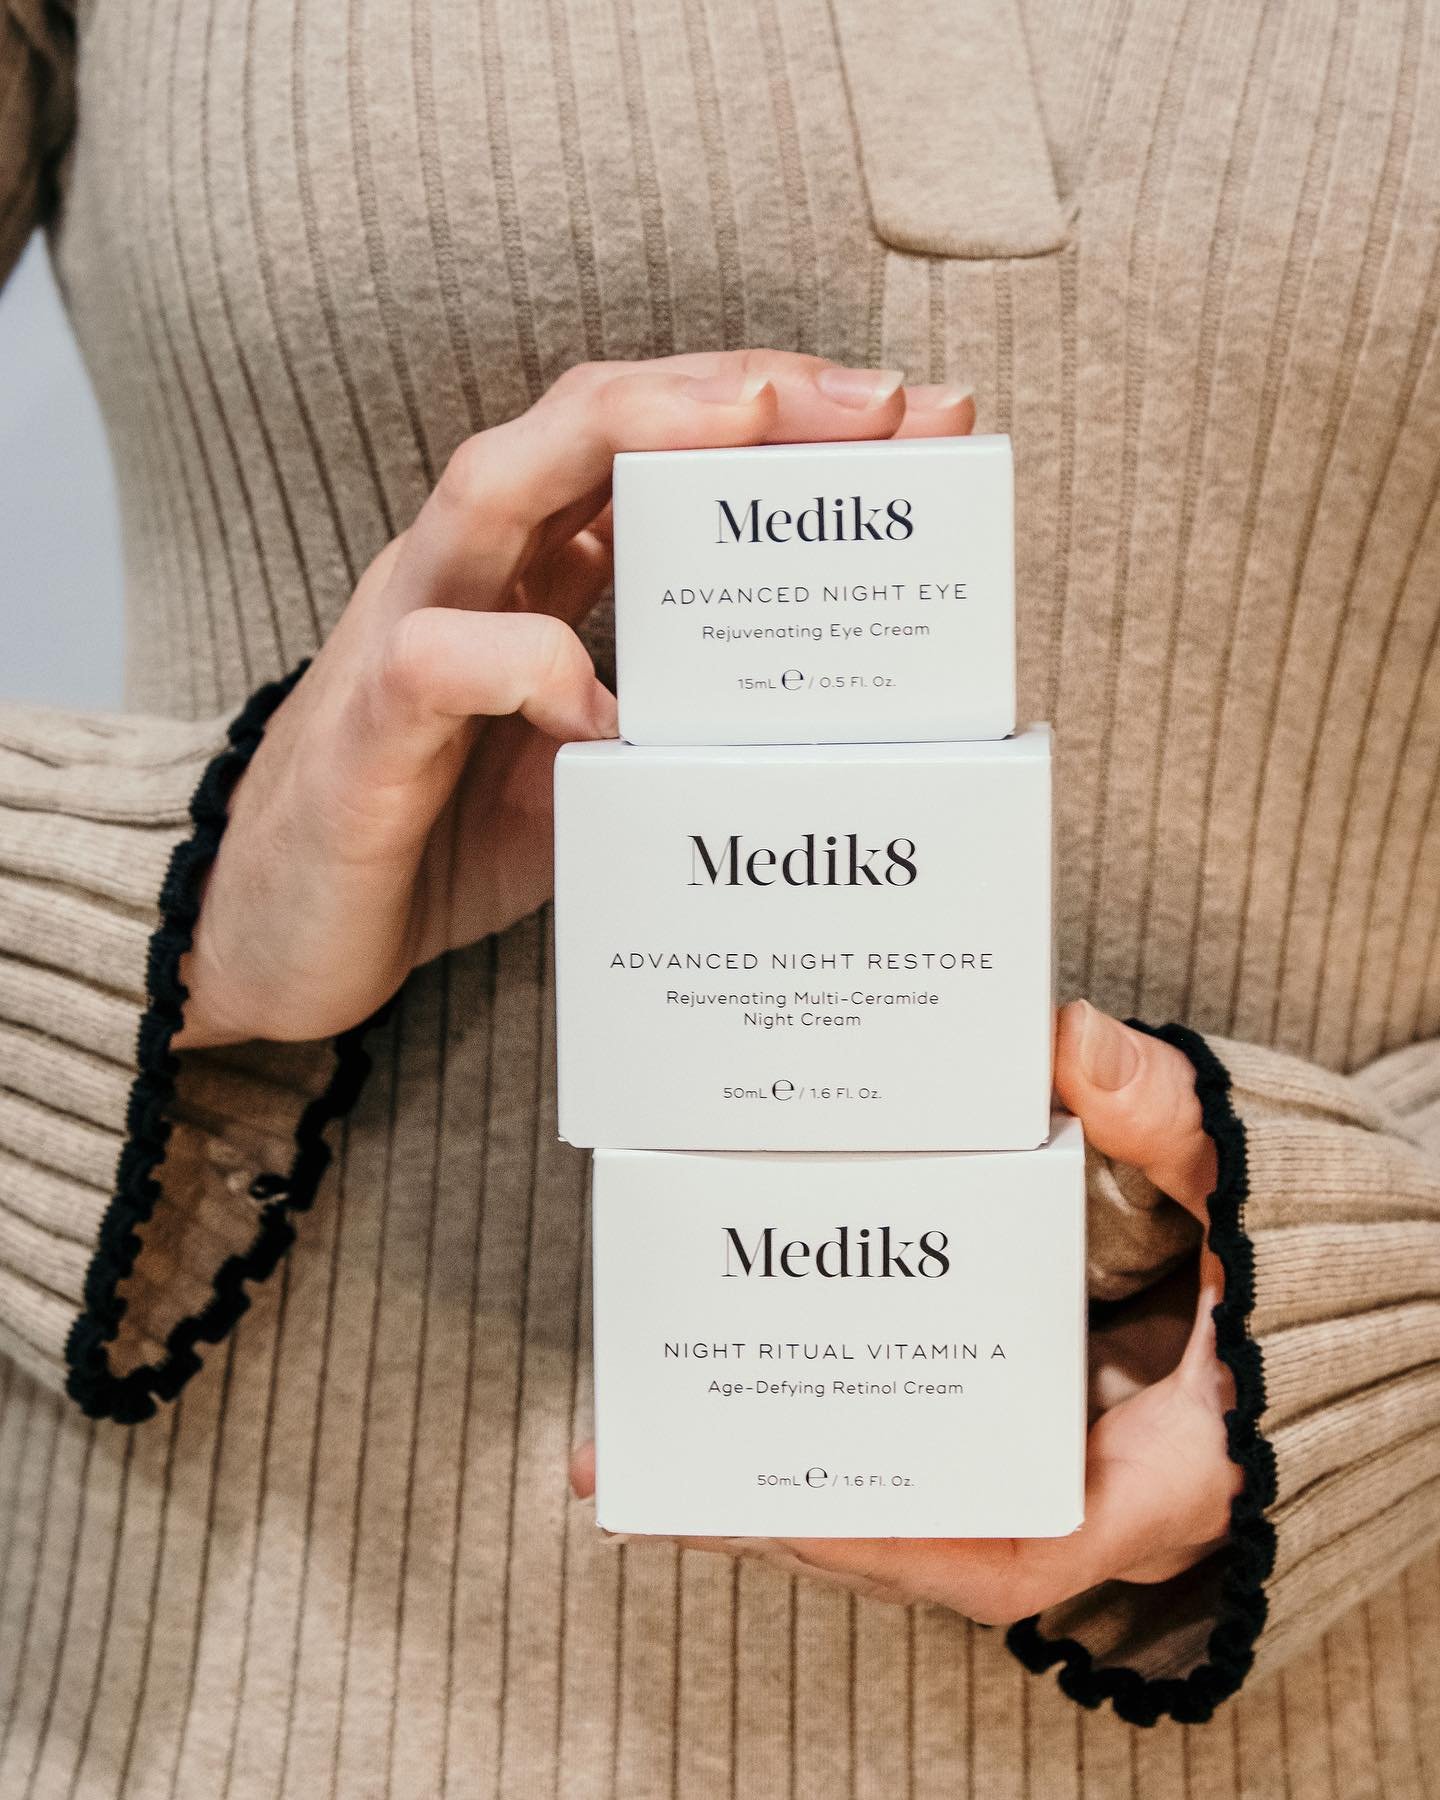 A little stack of evening goodies for your skin. Anti-aging, hydrating, repairing and nourishing, there is a product to suit all skin types and concerns in the @medik8 range. In clinic skin consultations are the best way to build your individual skin